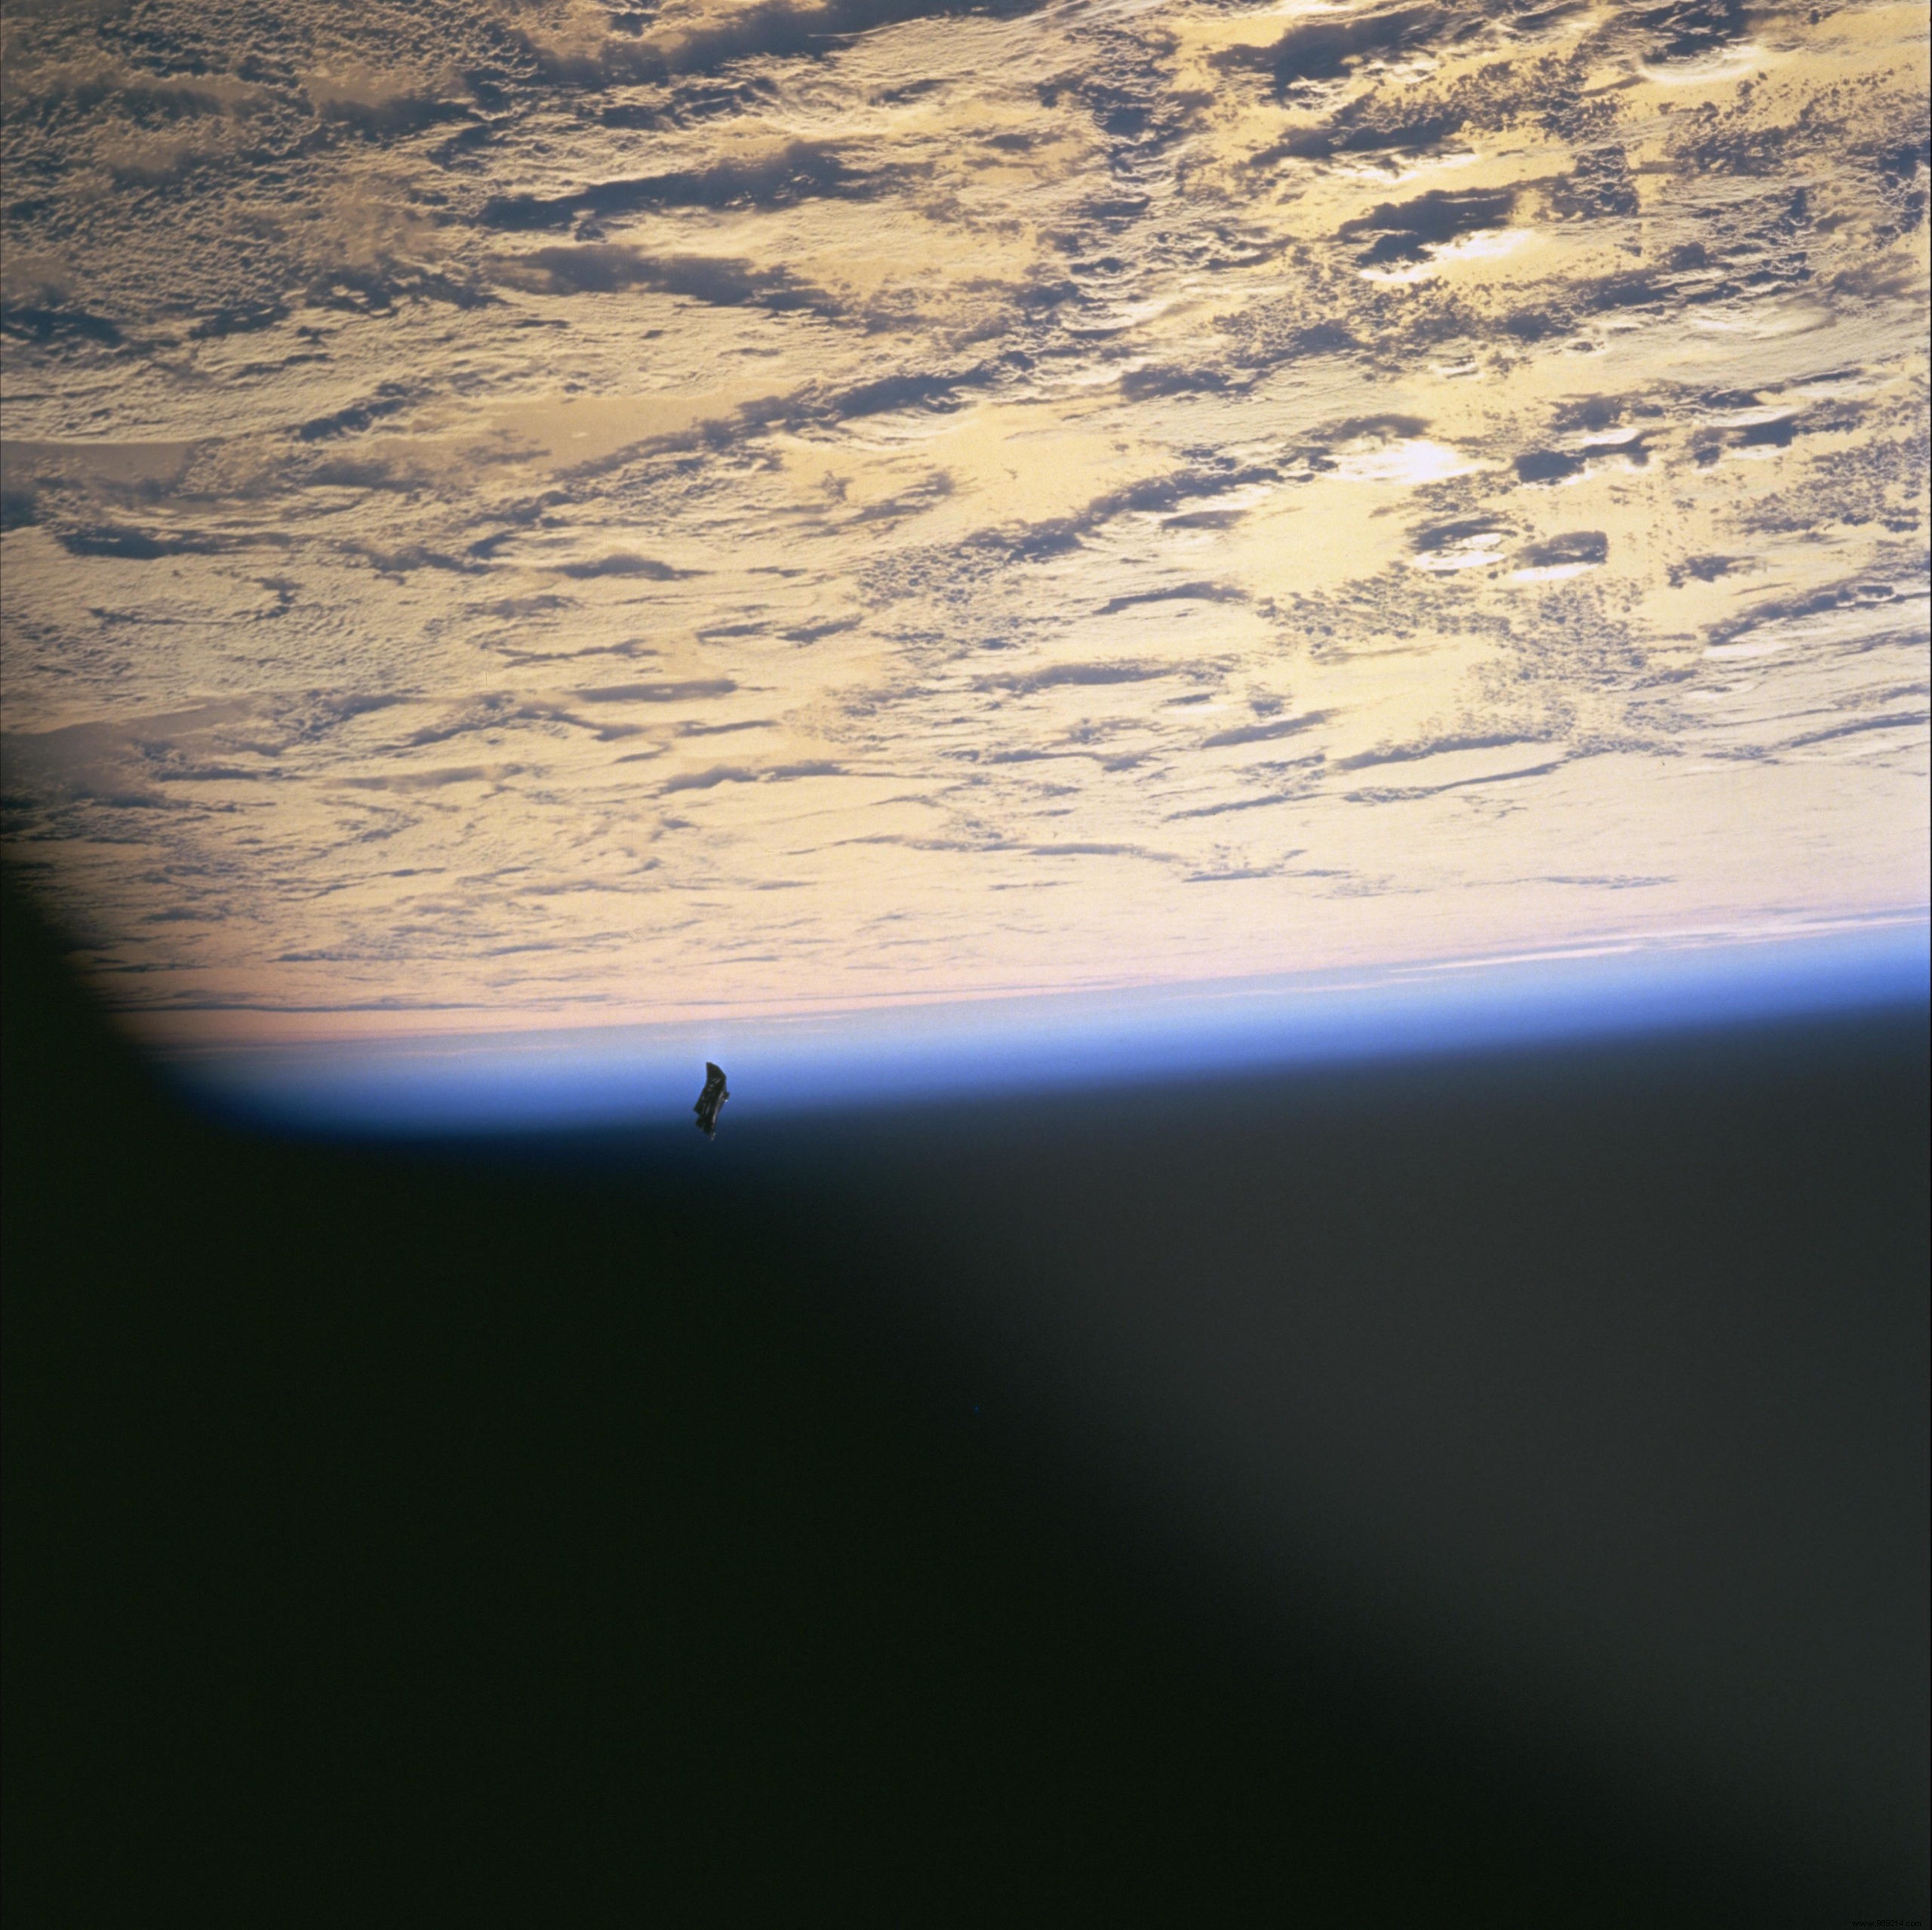 Do you know the Black Knight Satellite theory? 